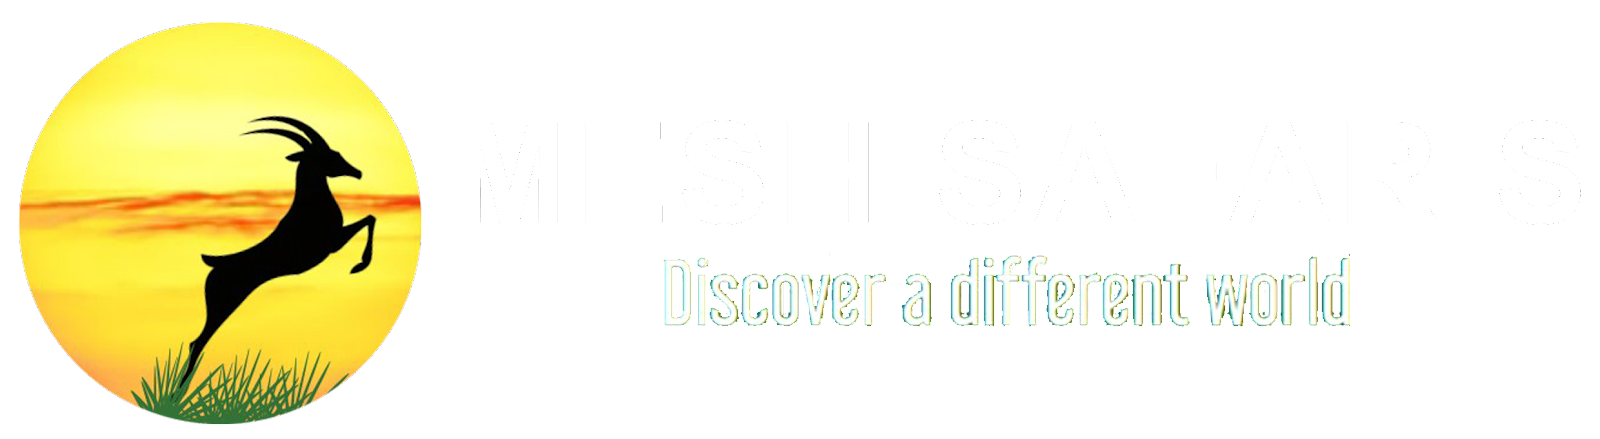 Mesh Safaris - Discover A Different World